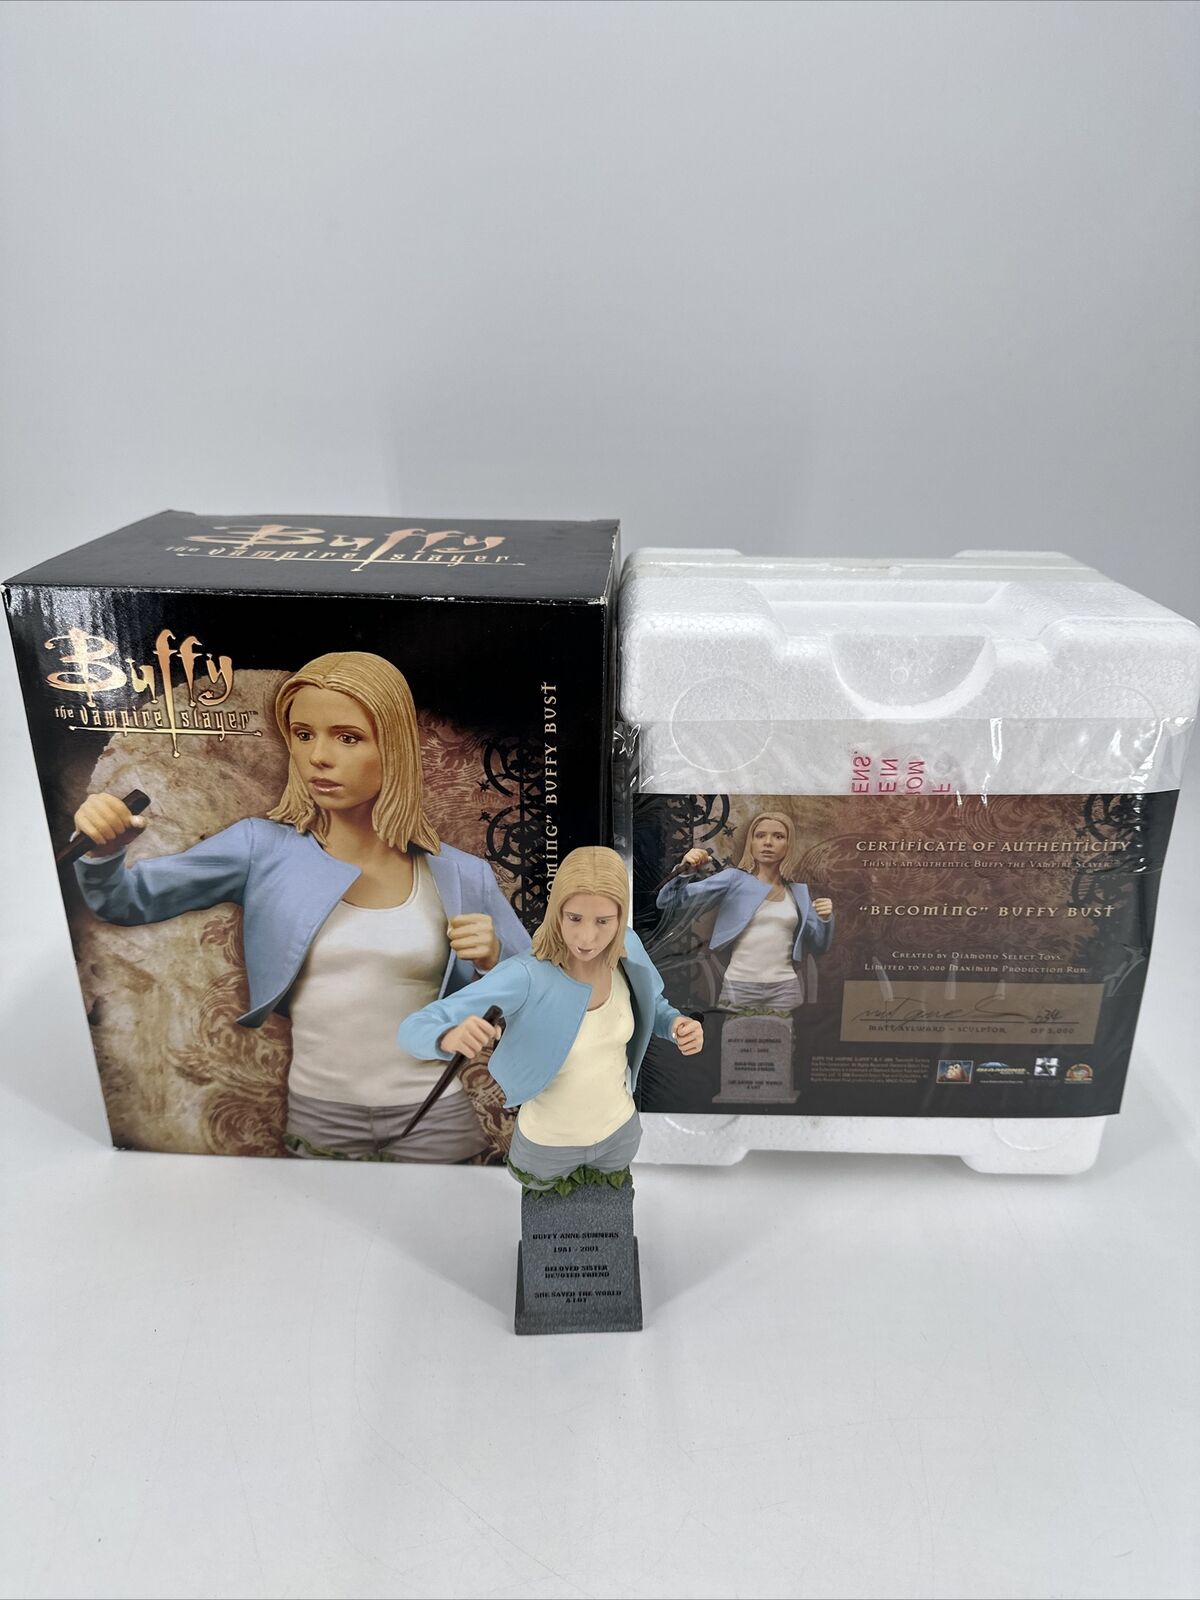 GENTLE GIANT DIAMOND SELECT BUFFY THE VAMPIRE SLAYER “BECOMING” STATUE BUST